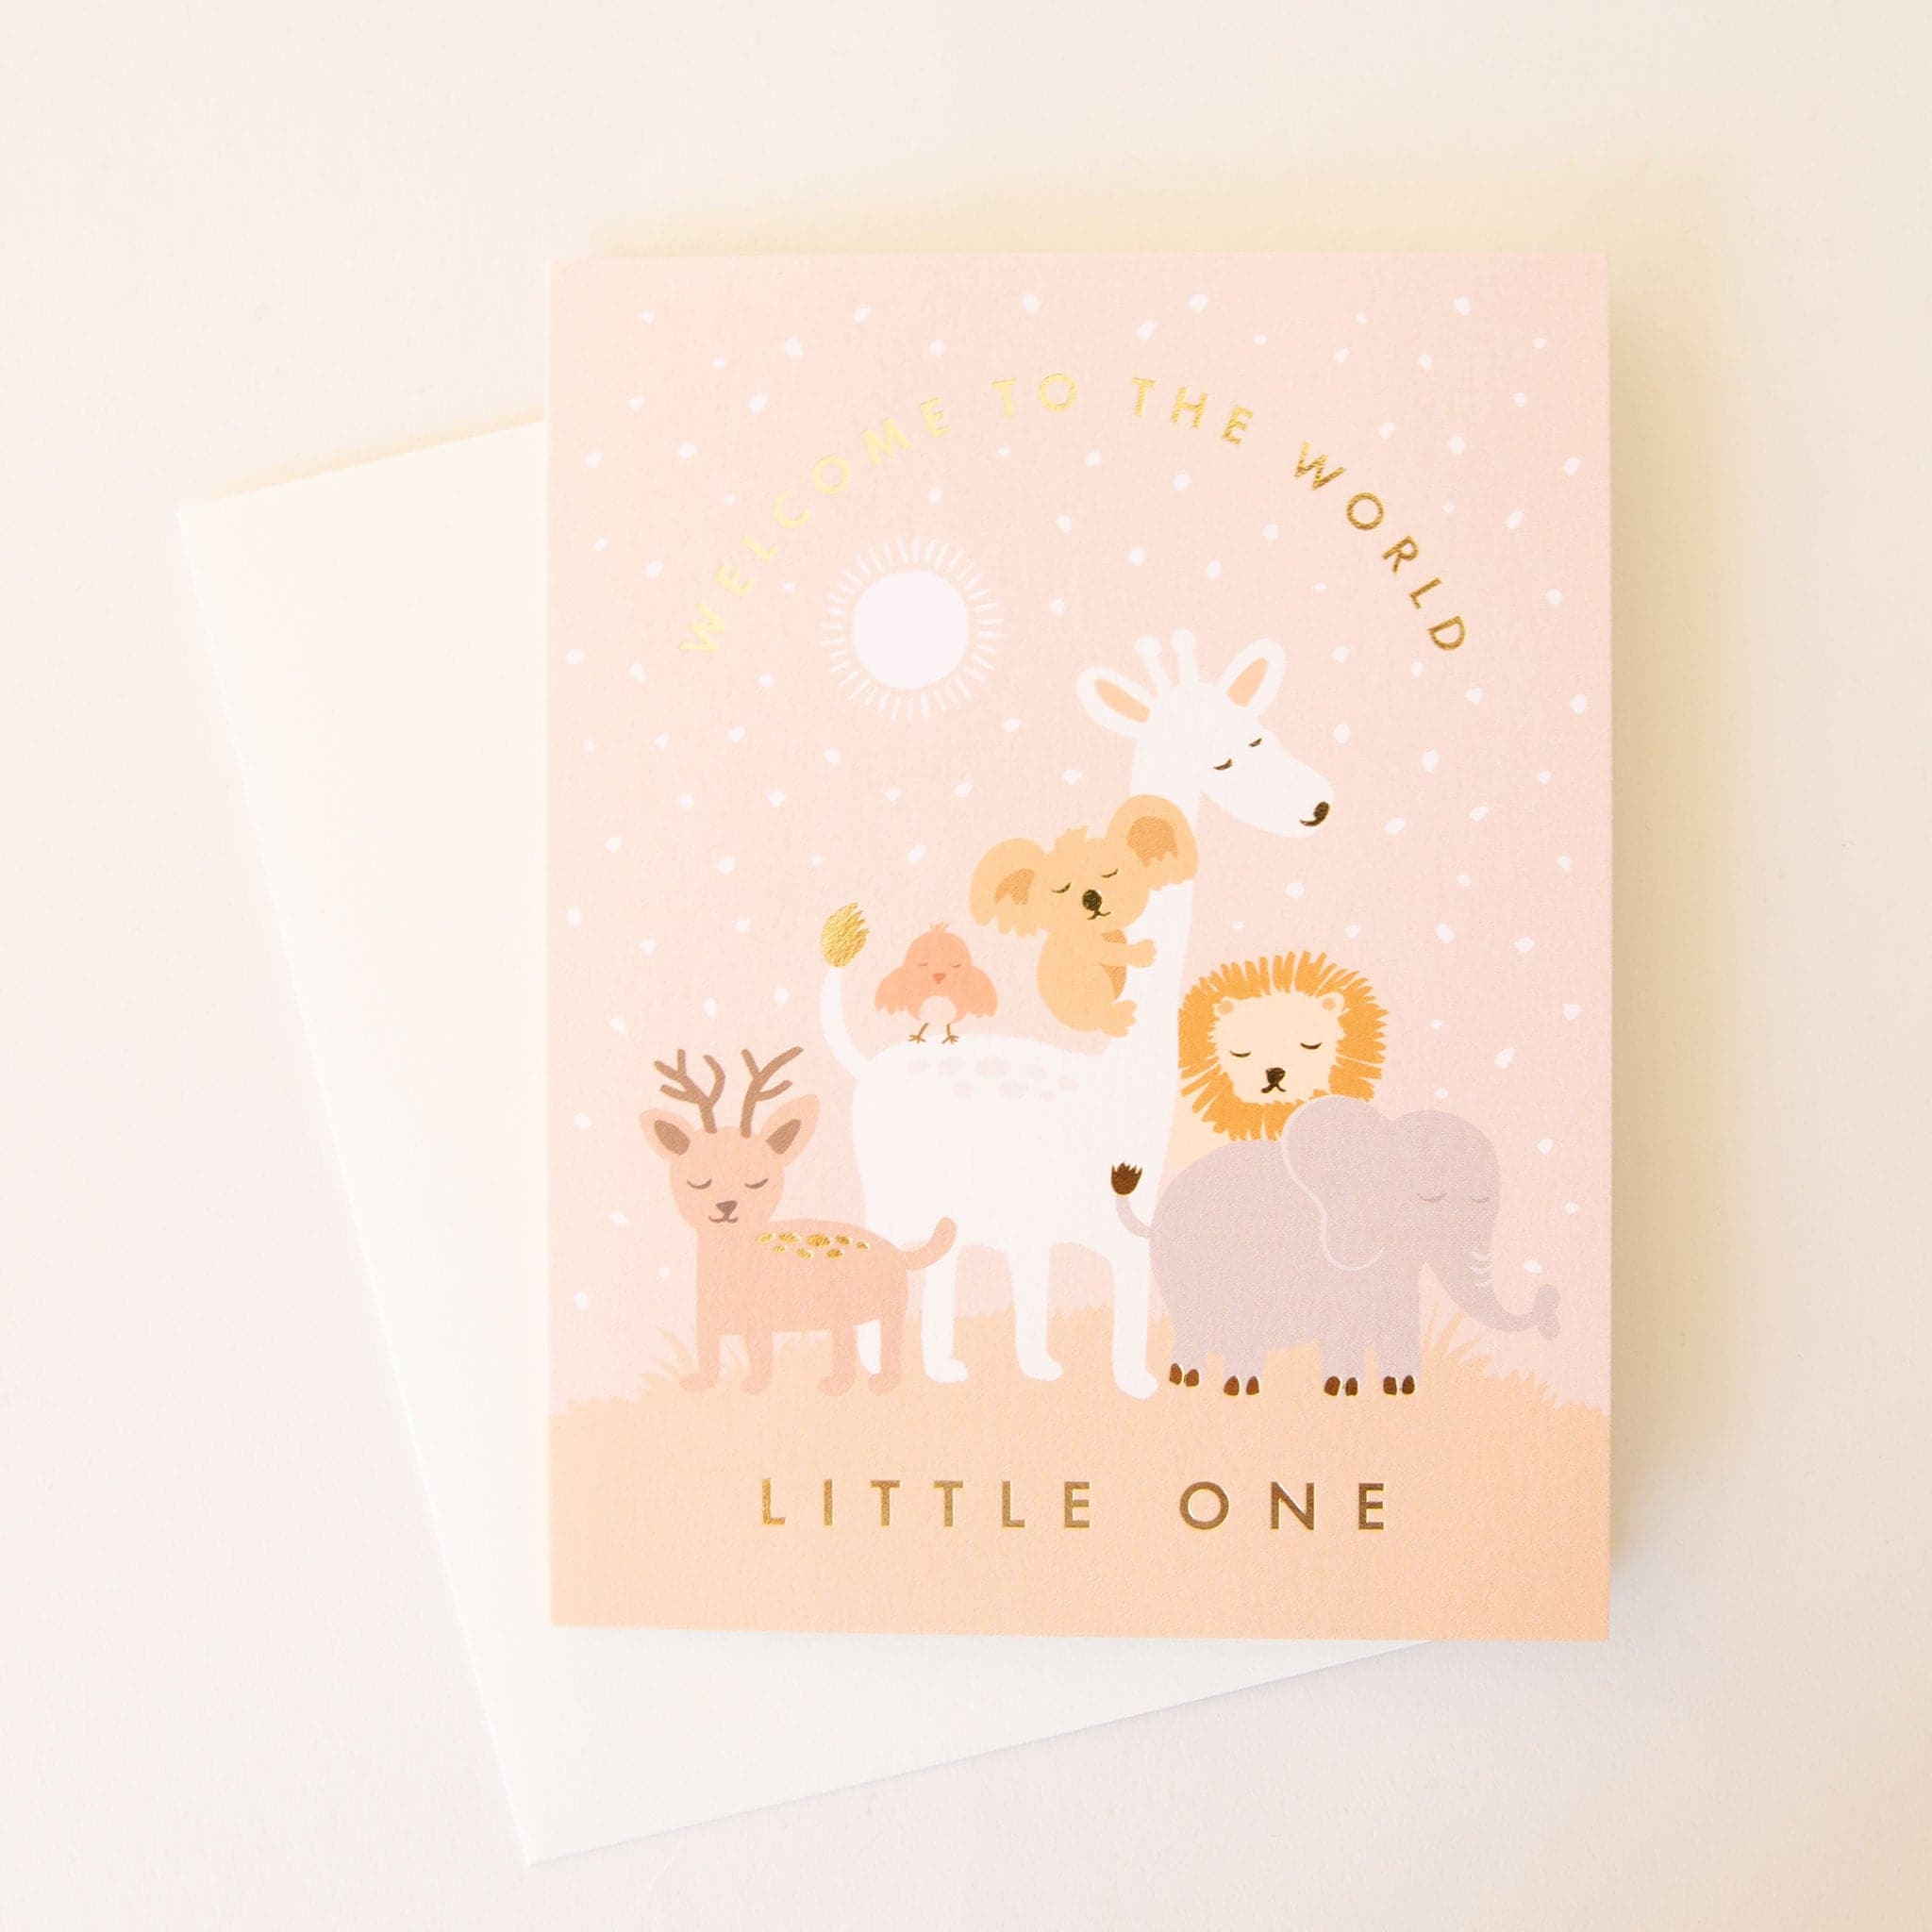 Soft pink card filled with a herd of peaceful animals including a dear, giraffe, koala and more. The text 'Welcome to the world' curves above them in gold foil across a star filled sky. Below the scene reads 'little one' in gold foil capital lettering. The card is accompanied by a solid white envelope. 